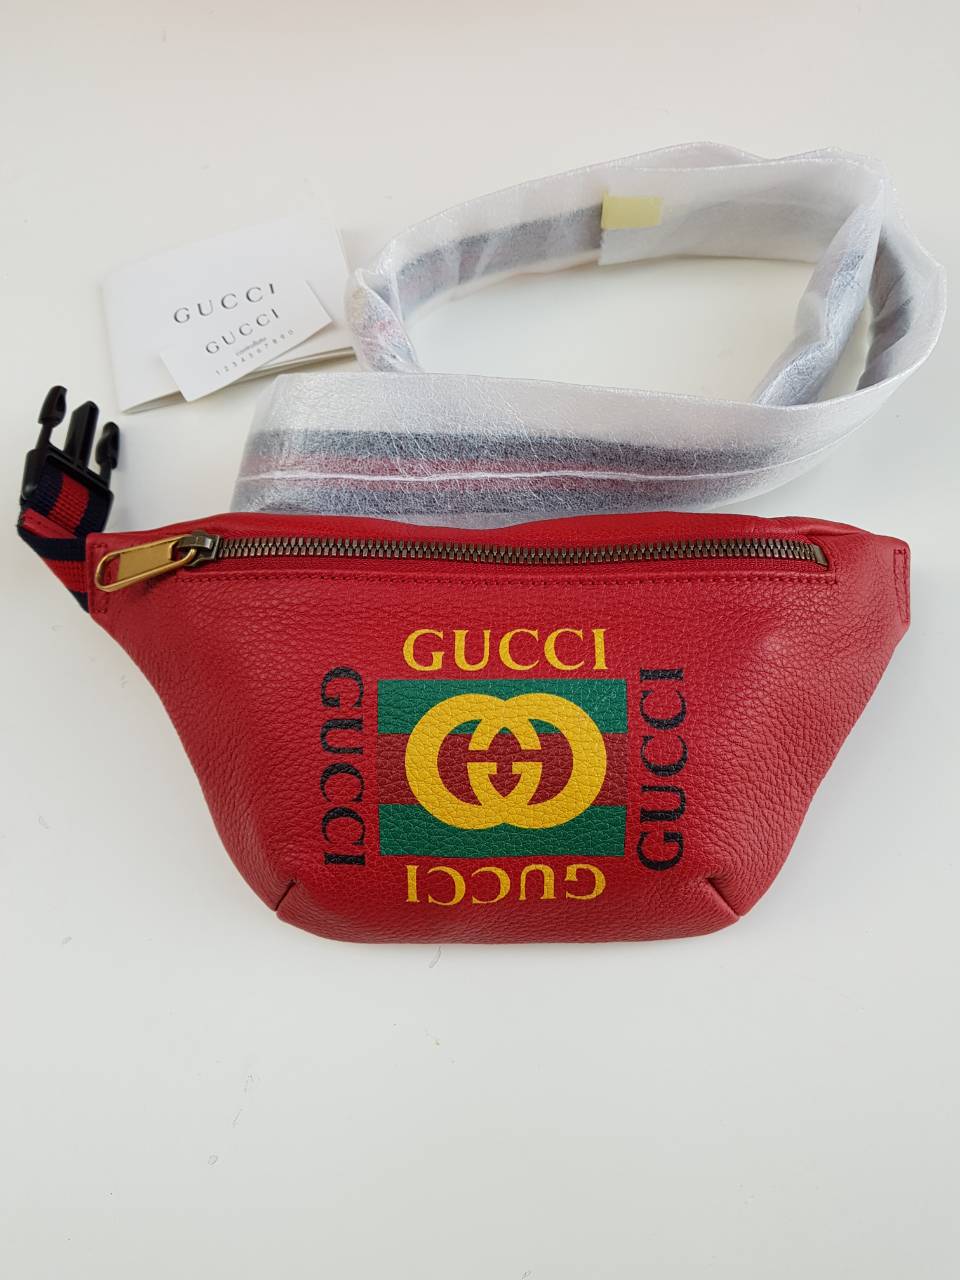 Authentic Gucci Belt Bag Red